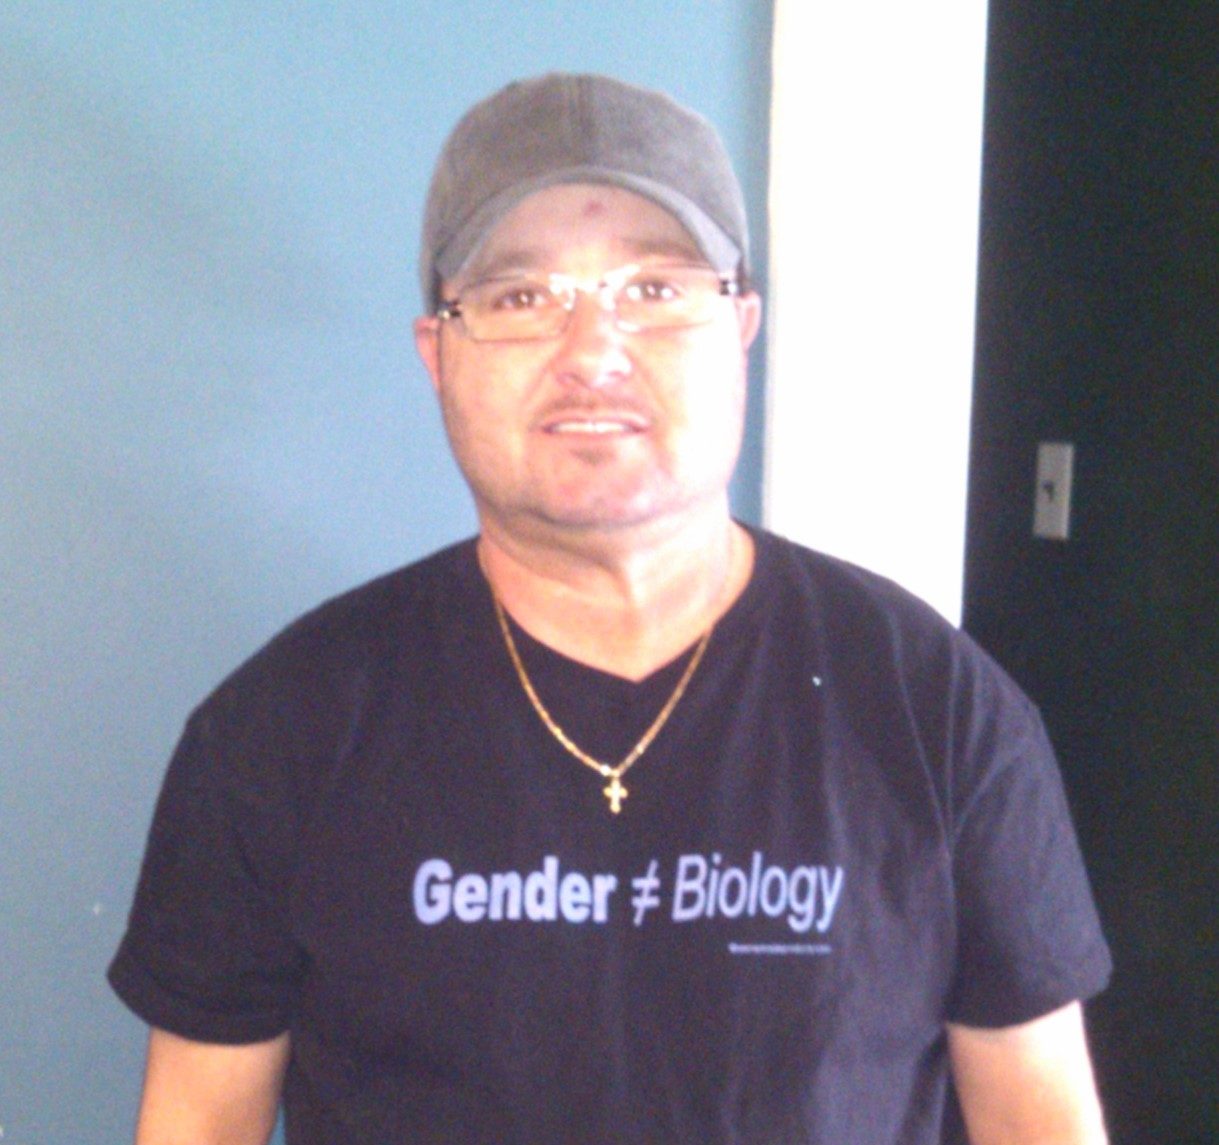 BJ Buchanan, Master Plumber in Newport News, VA and across Hampton Roads, appears in a head-and-shoulders shot with a grey ballcap and black t-shirt that says "Gender ≠ Biology." He stands in front of a blue and white wall.